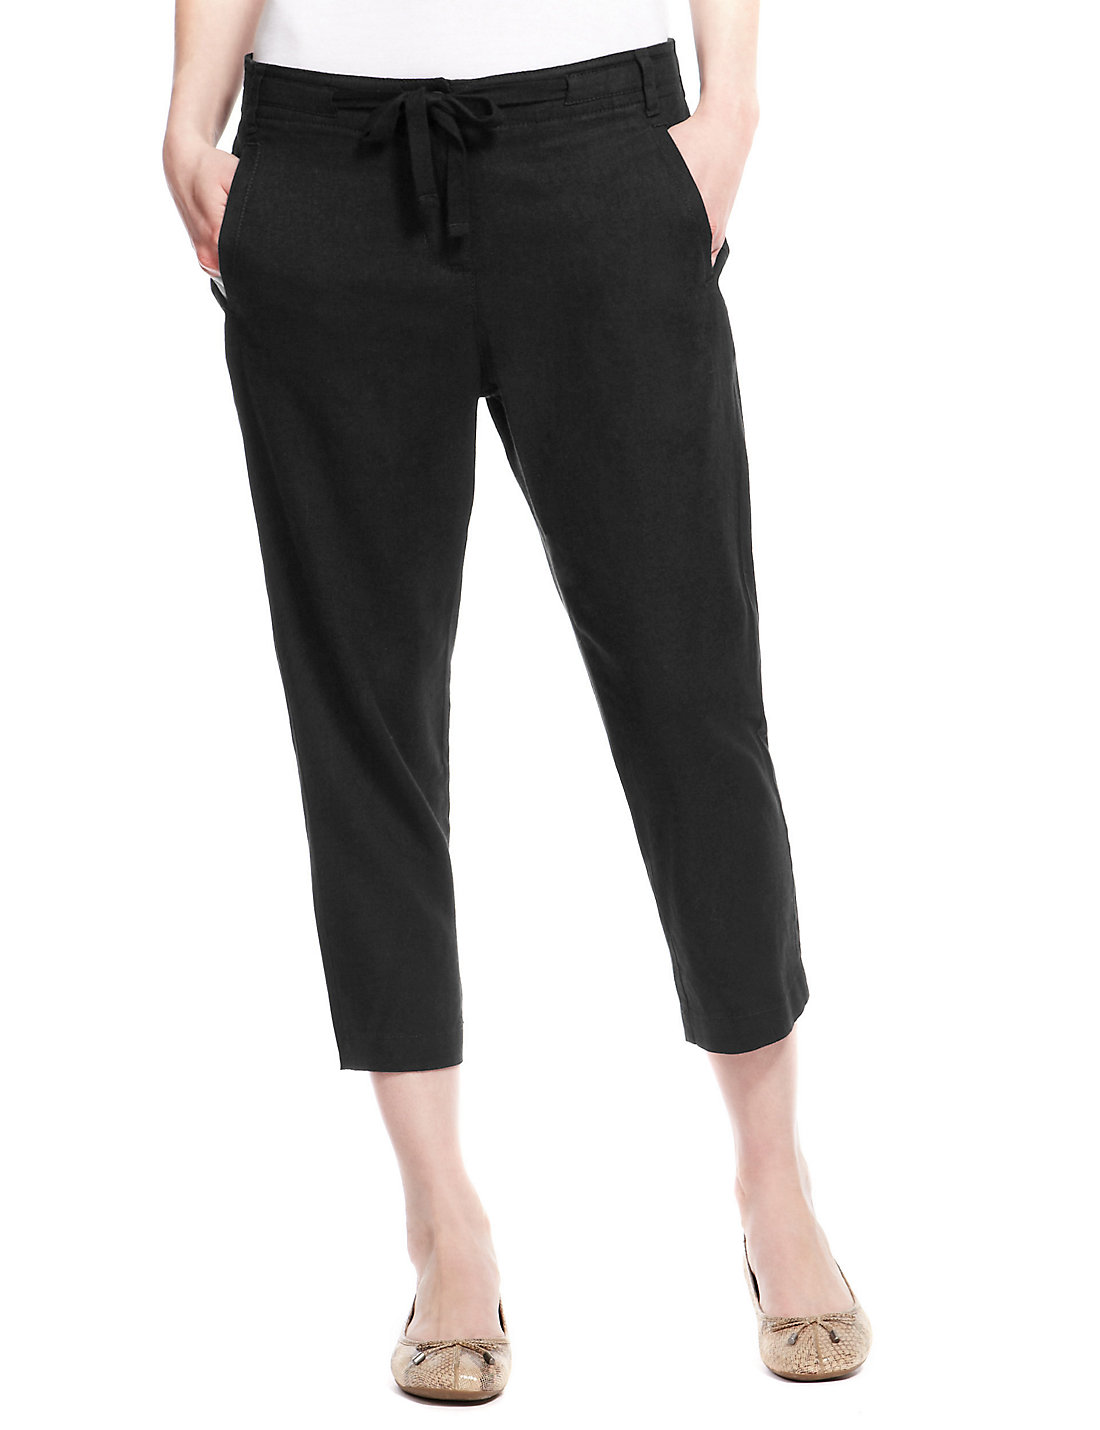 Marks and Spencer - - M&5 BLACK Linen Blend Cropped Trousers - Size 14 ...